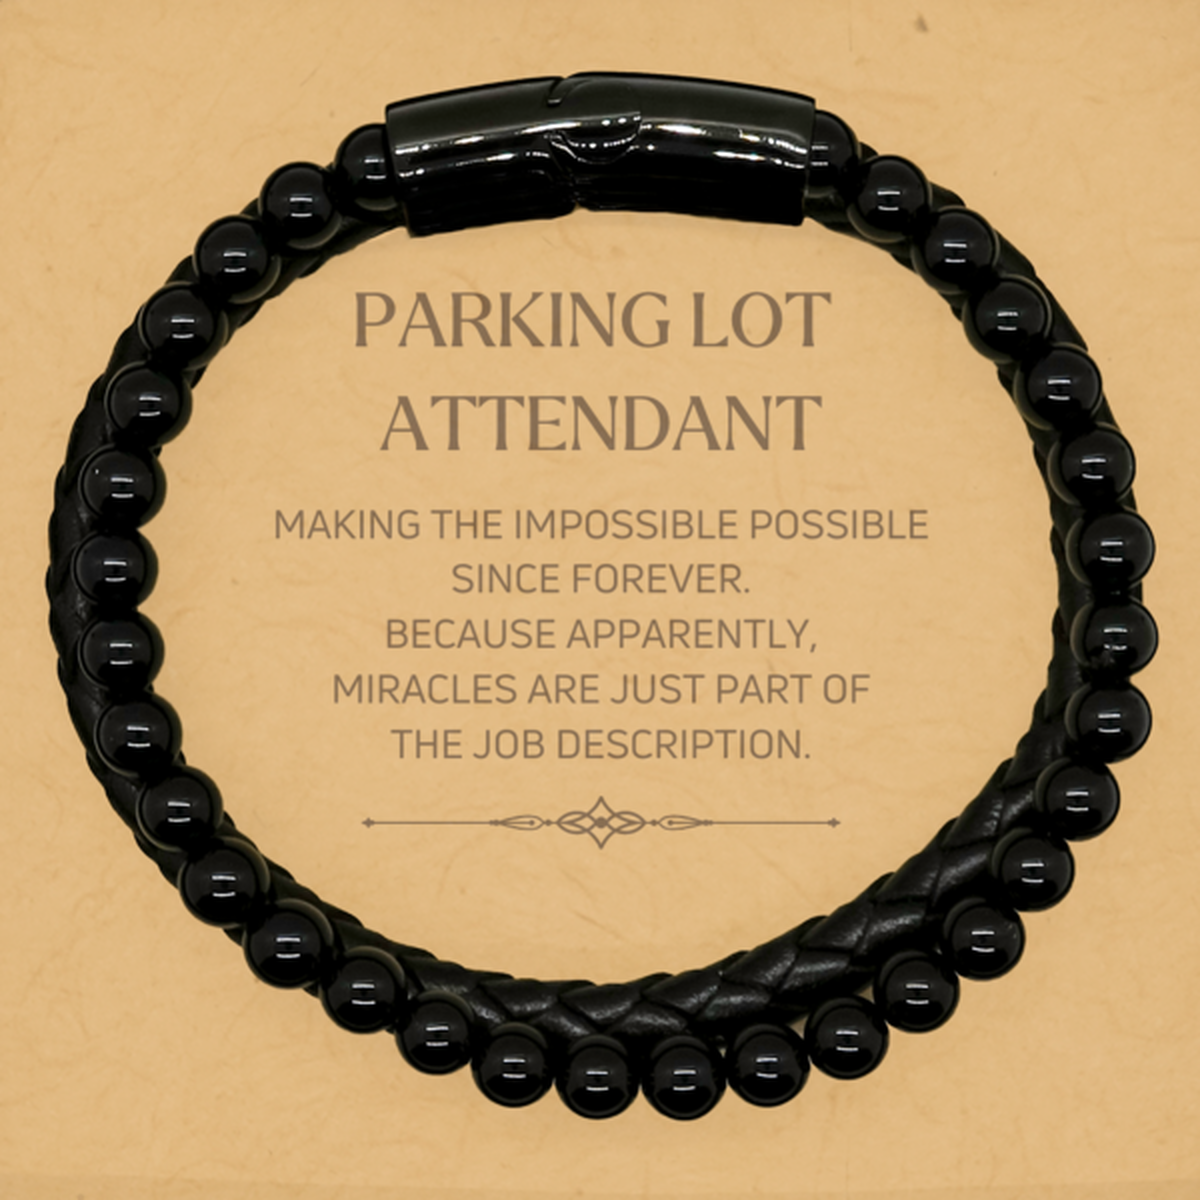 Funny Parking Lot Attendant Gifts, Miracles are just part of the job description, Inspirational Birthday Stone Leather Bracelets For Parking Lot Attendant, Men, Women, Coworkers, Friends, Boss